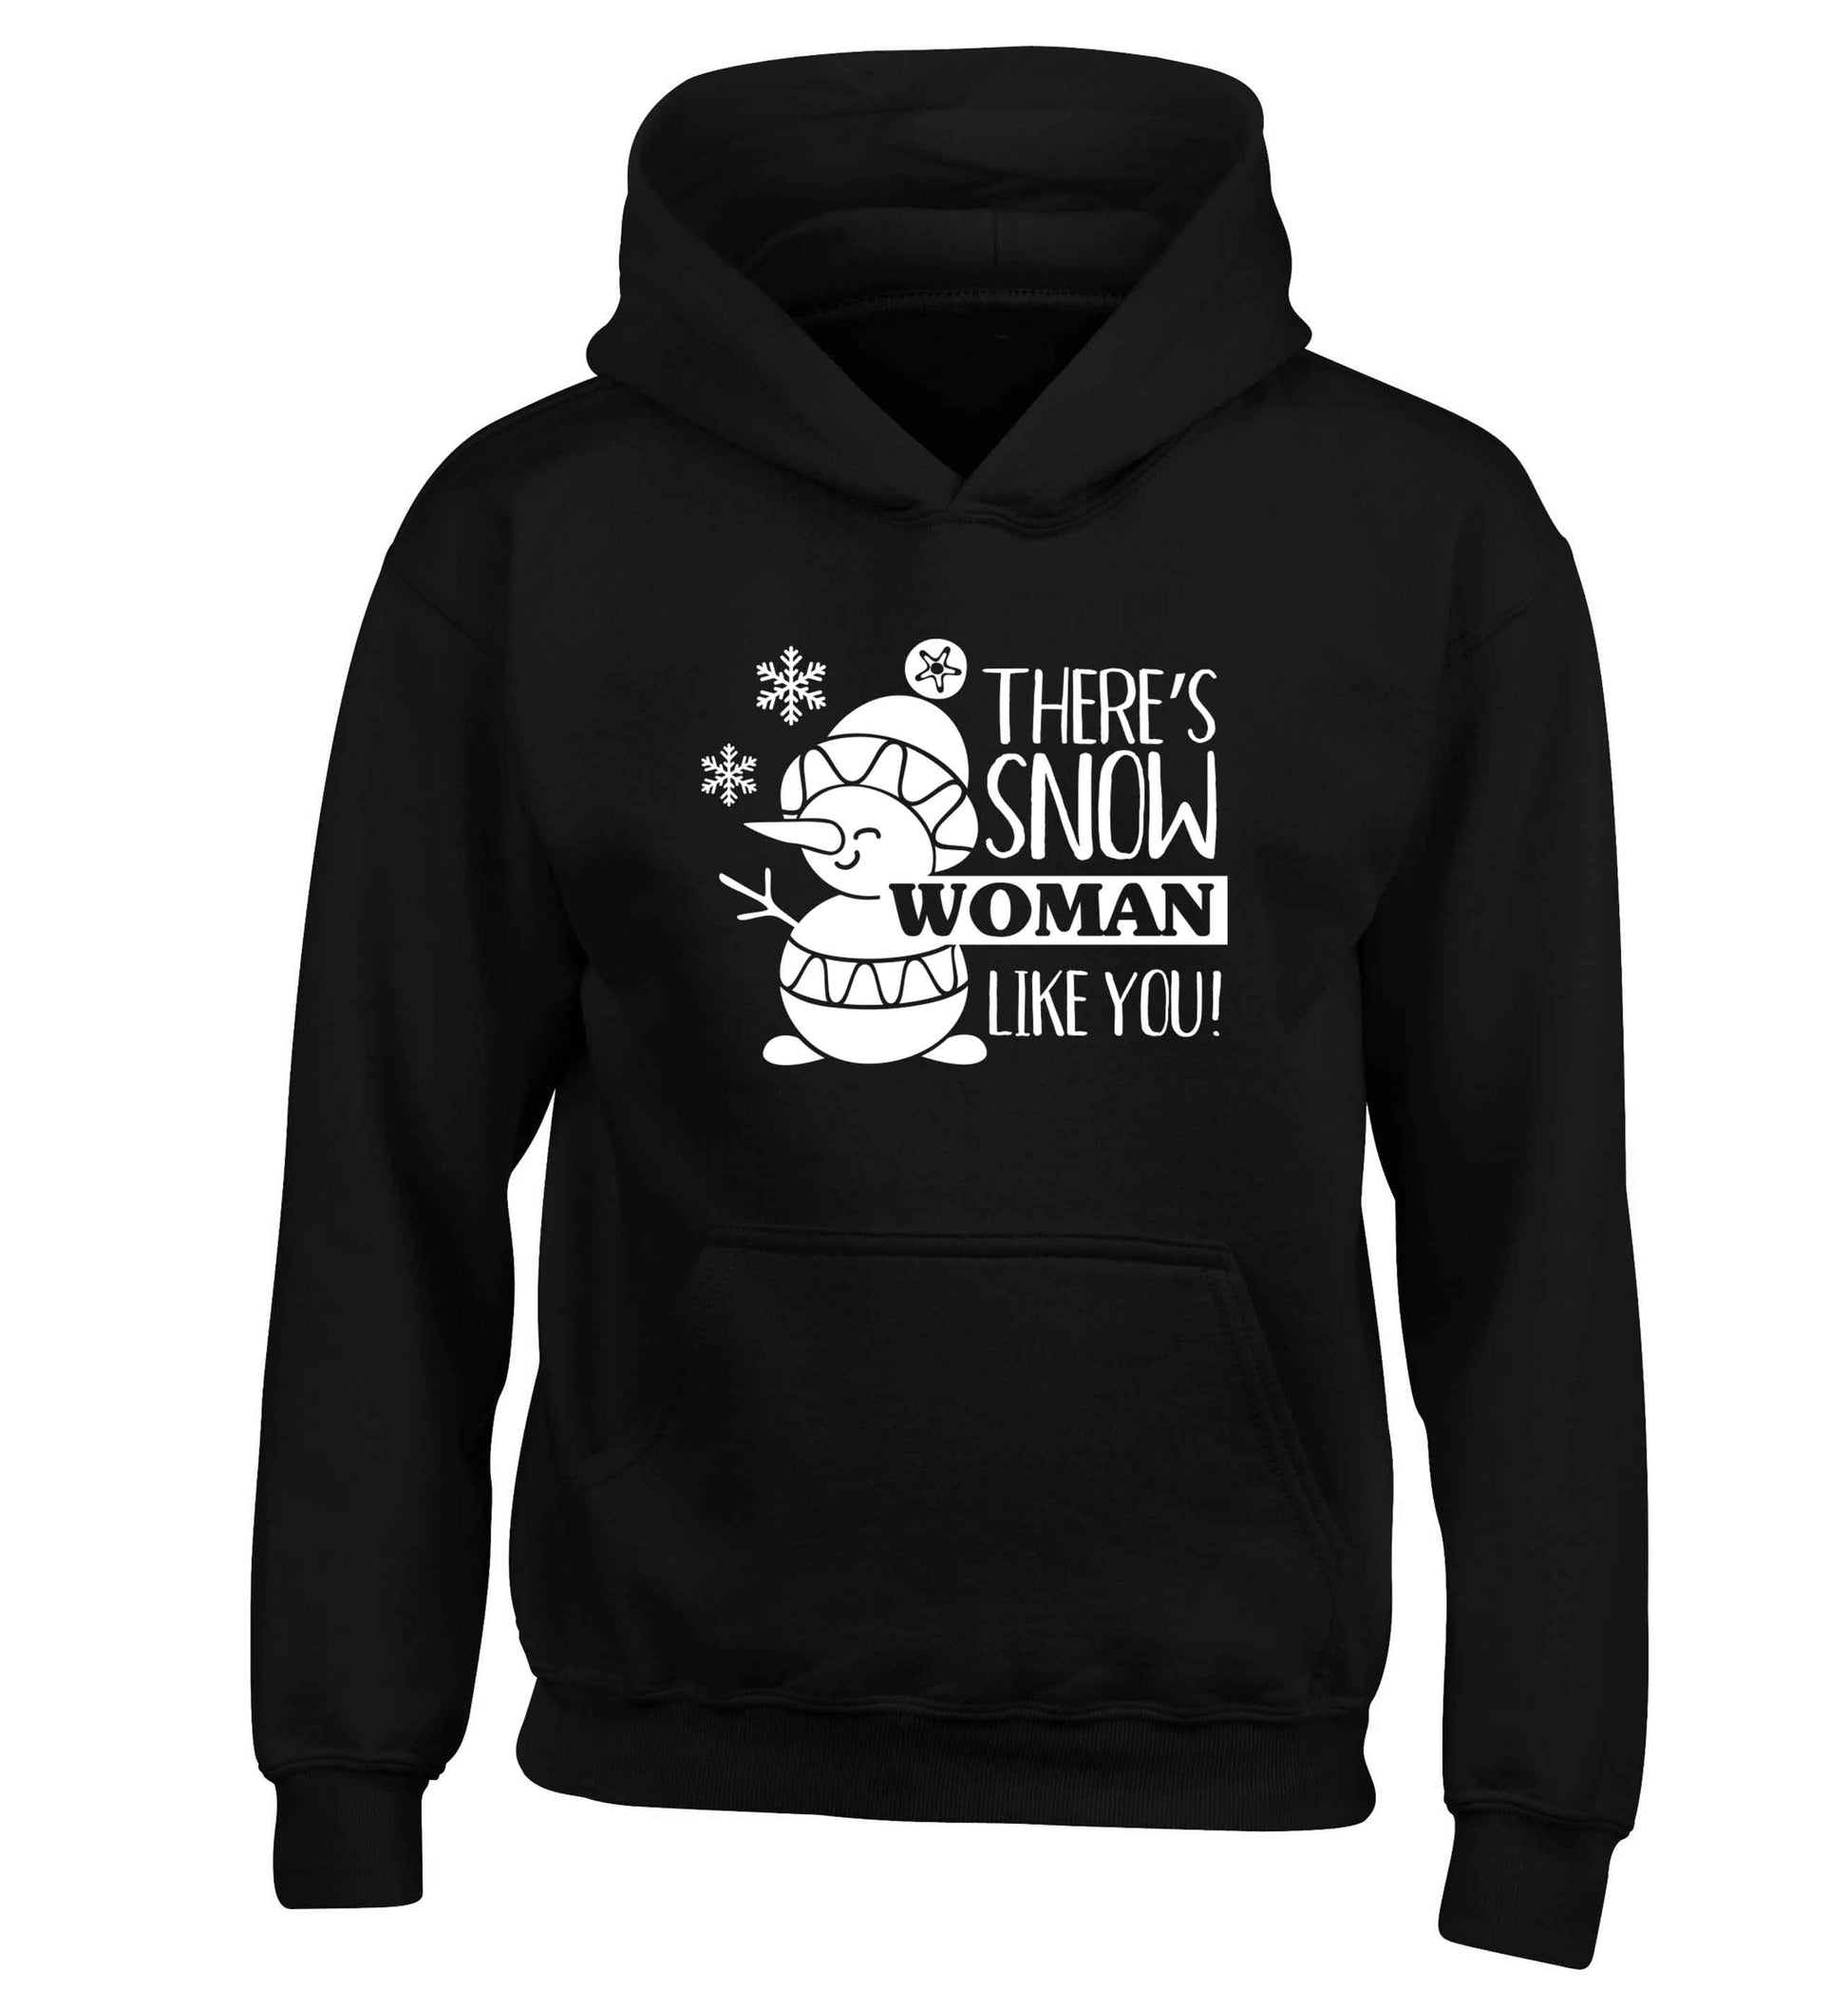 There's snow woman like you children's black hoodie 12-13 Years